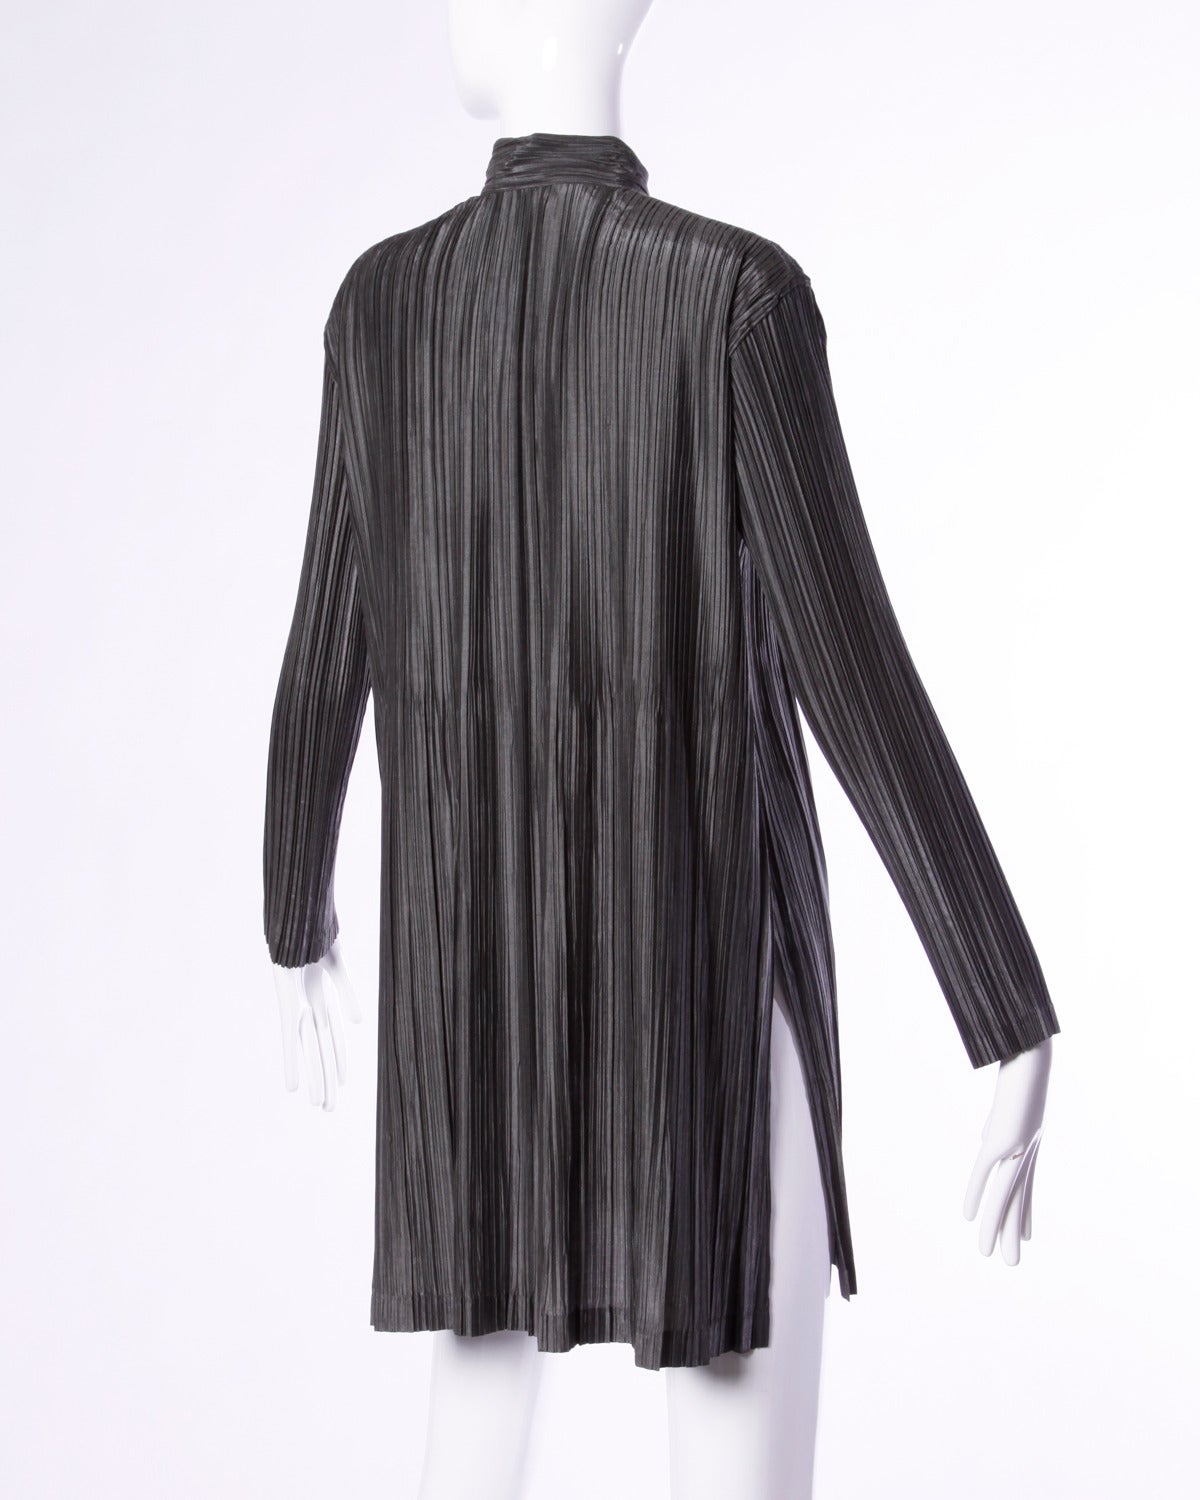 Issey Miyake Pleated Gray Tunic Dress or Button Up Top/ Blouse 1